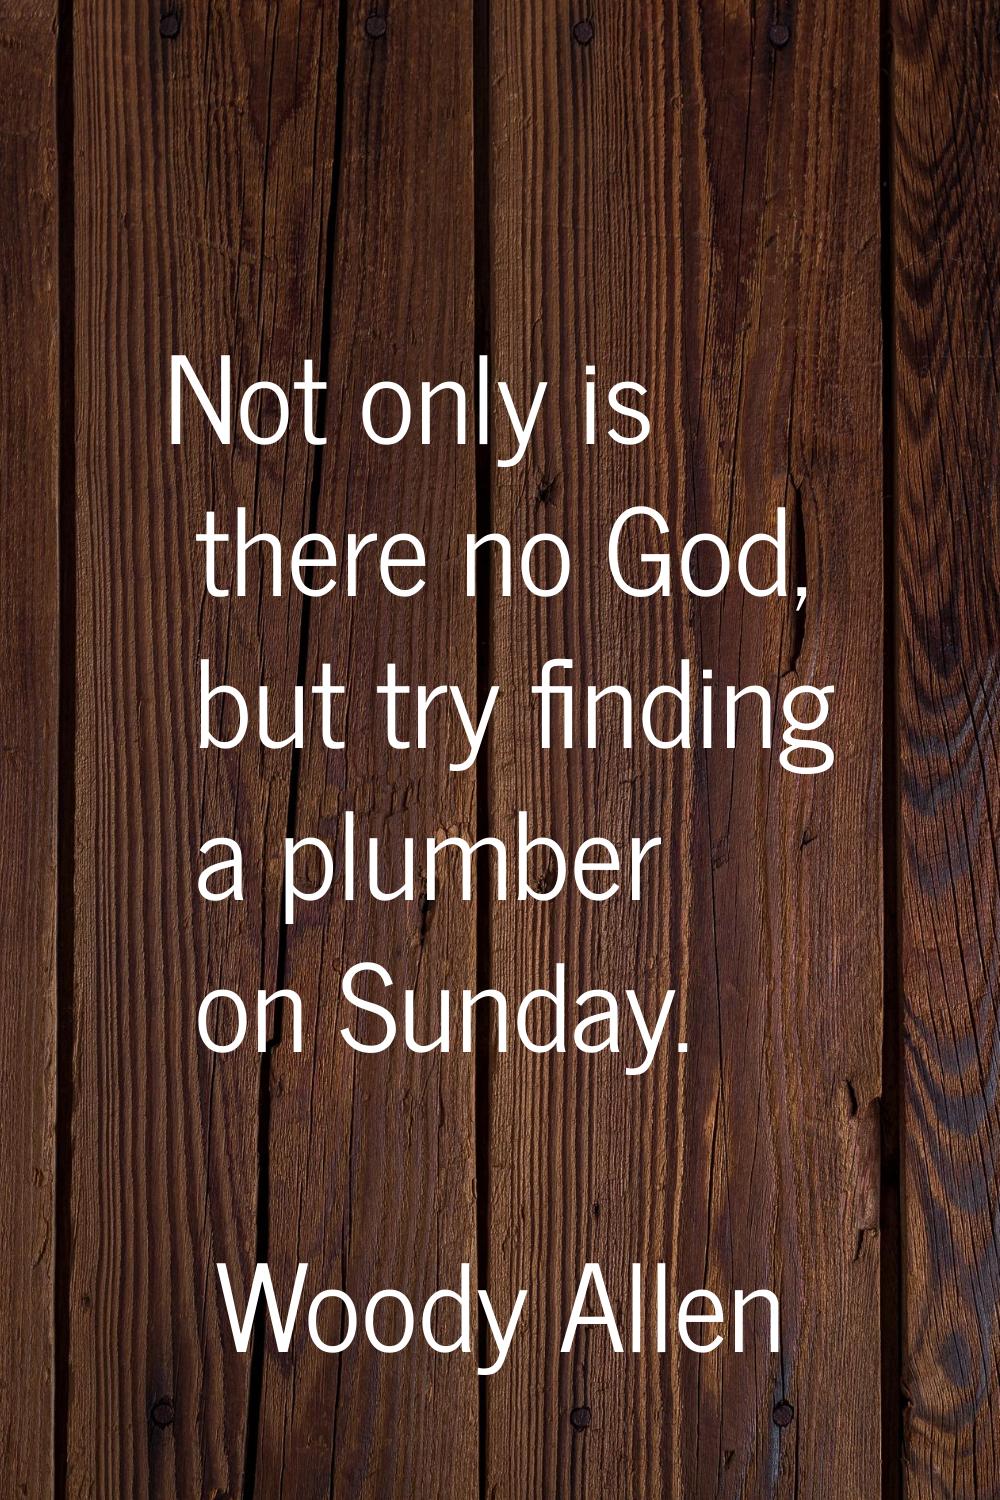 Not only is there no God, but try finding a plumber on Sunday.